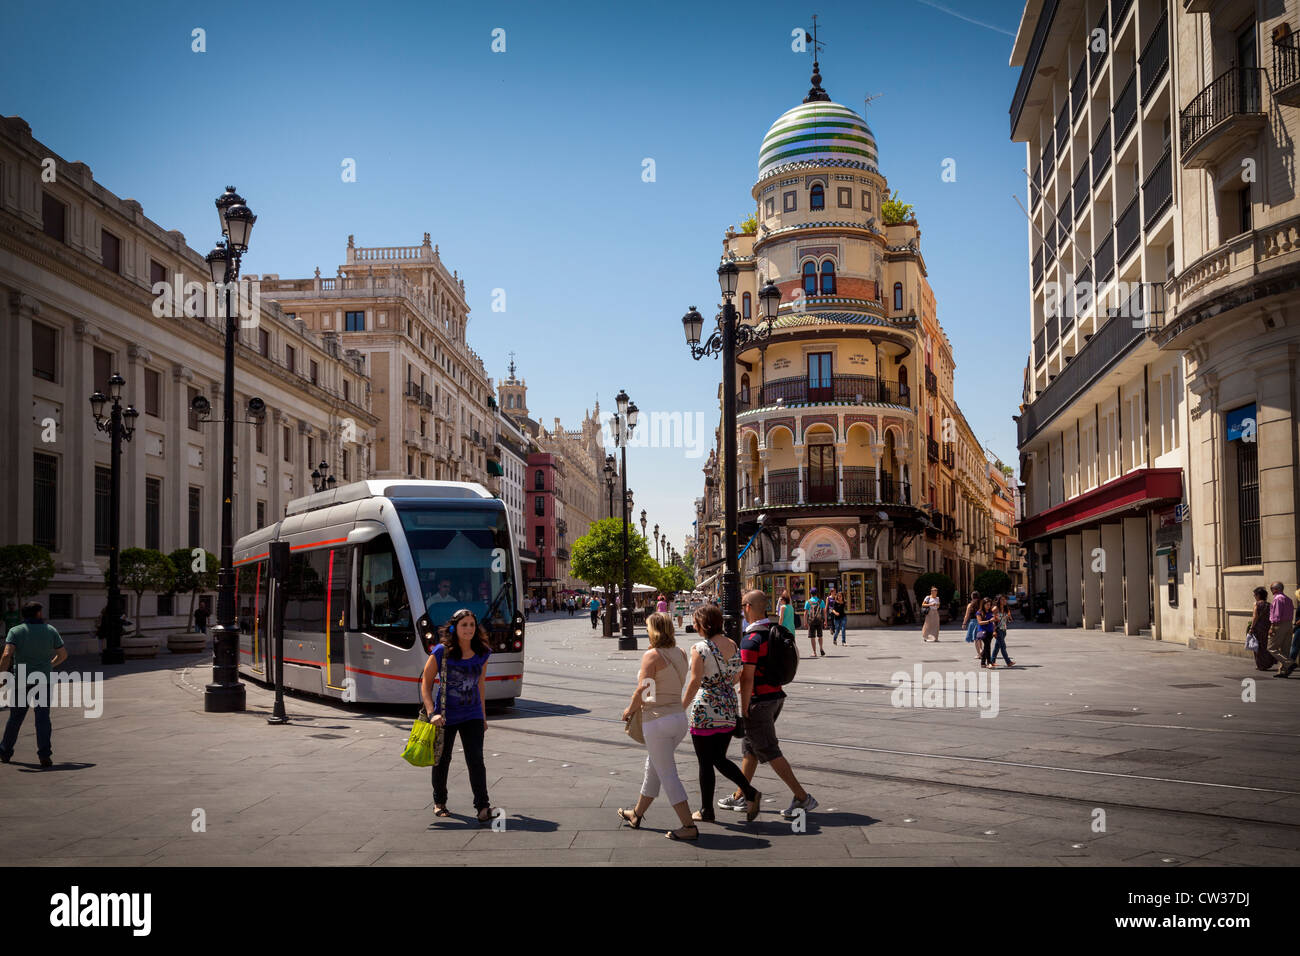 Seville, Andalusia, Spain, Europe. Street scene with modern tram system running through the city center. Stock Photo